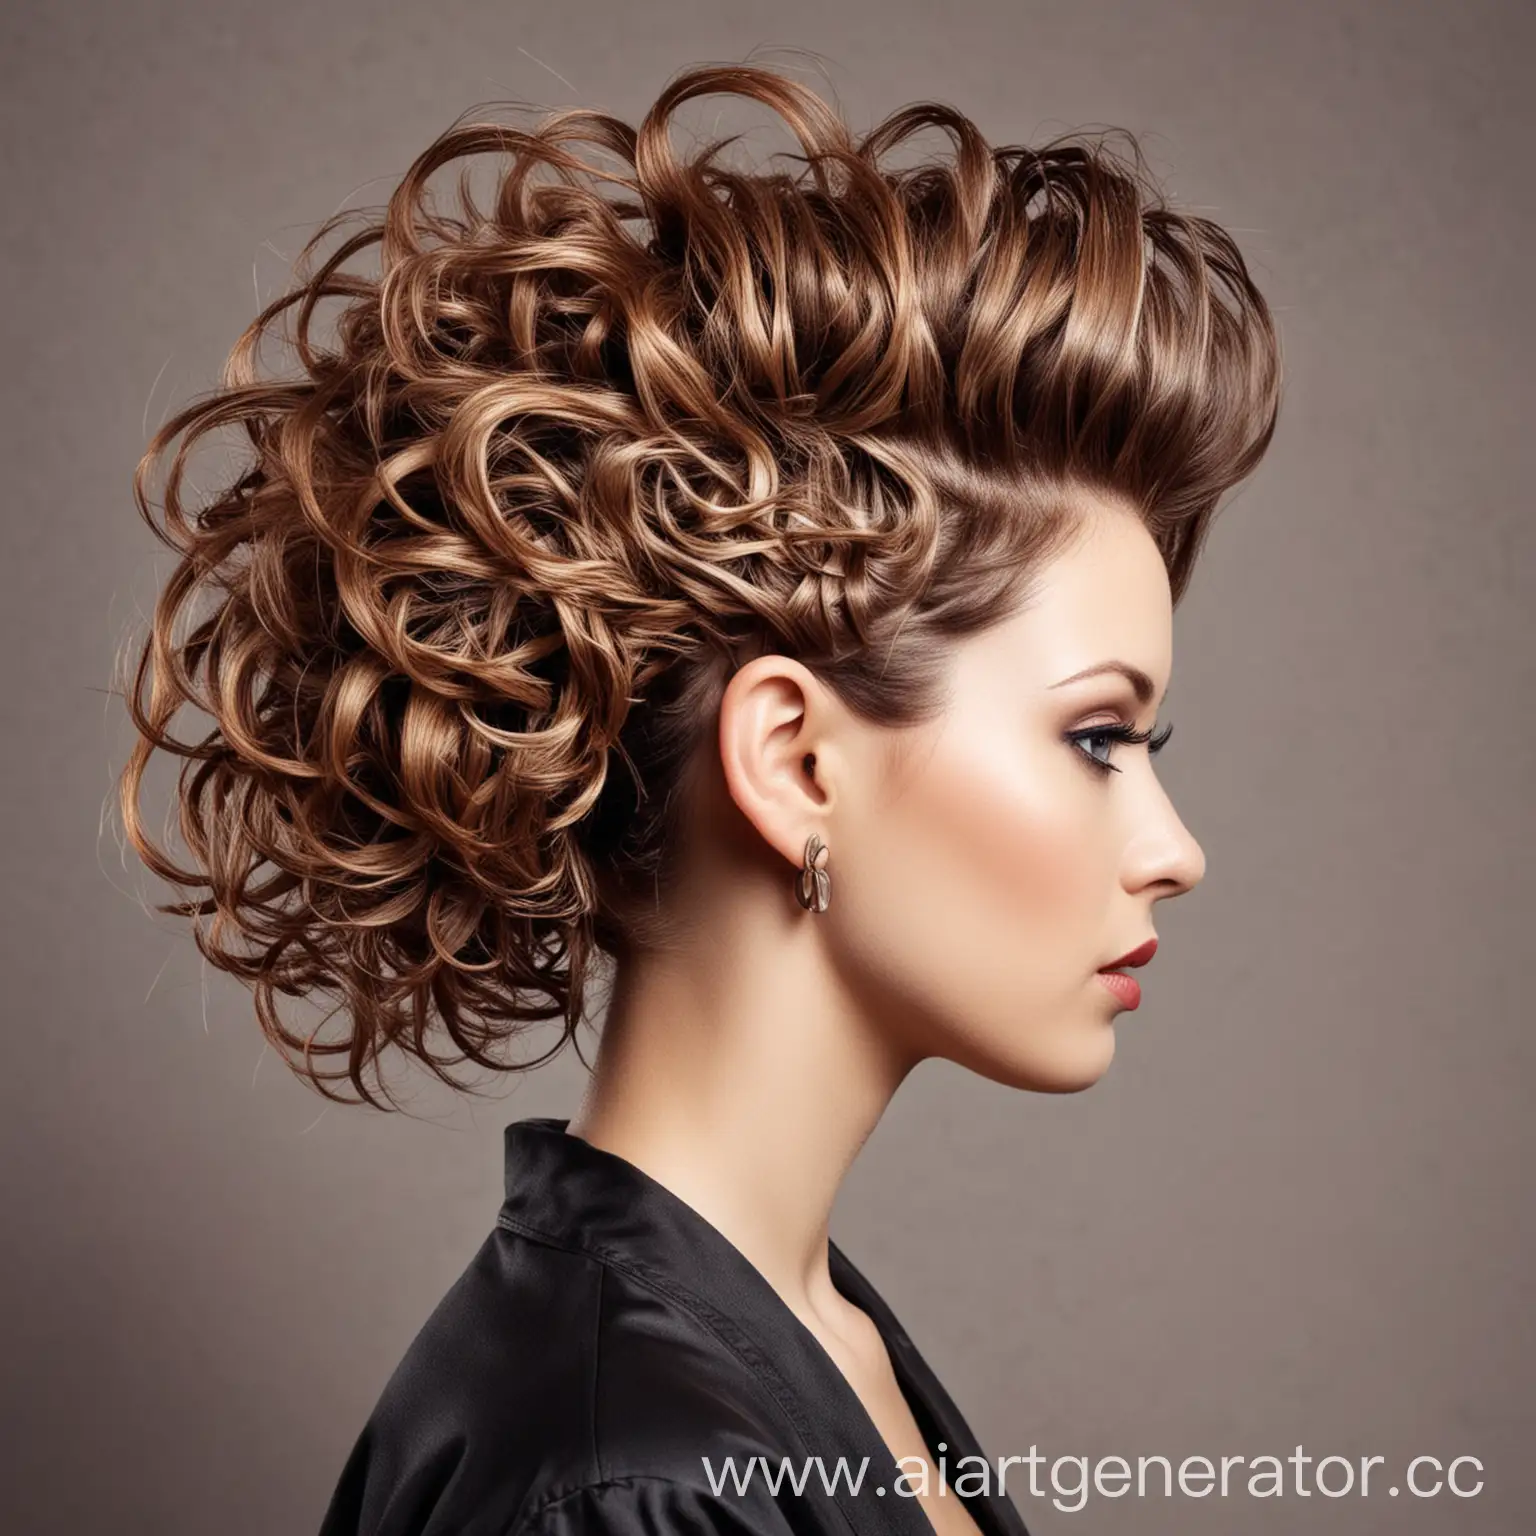 Innovative-Hair-Stylist-Crafting-Unique-Hairstyles